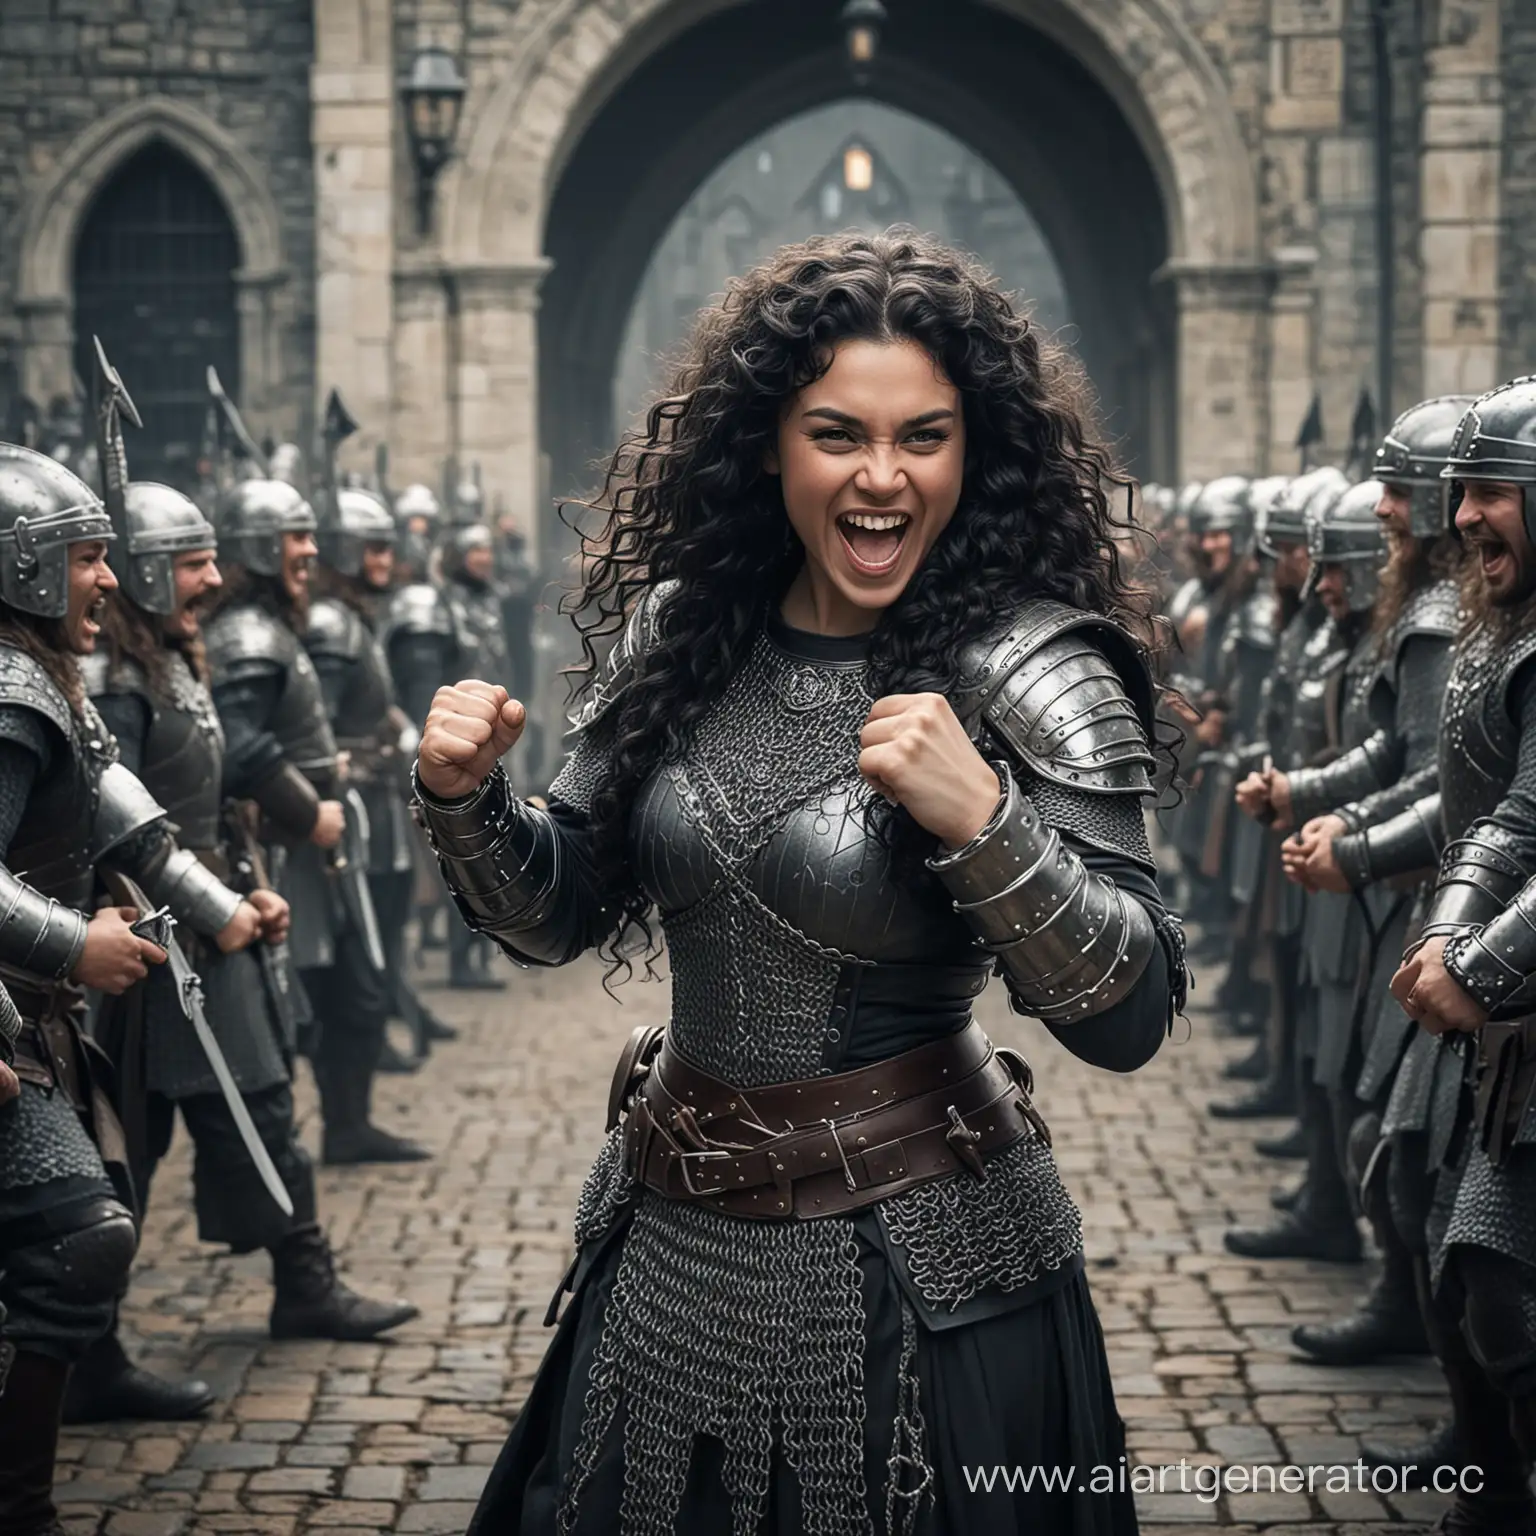 Laughing-Dwarf-Woman-Warrior-Amidst-Guards-in-Fantasy-World